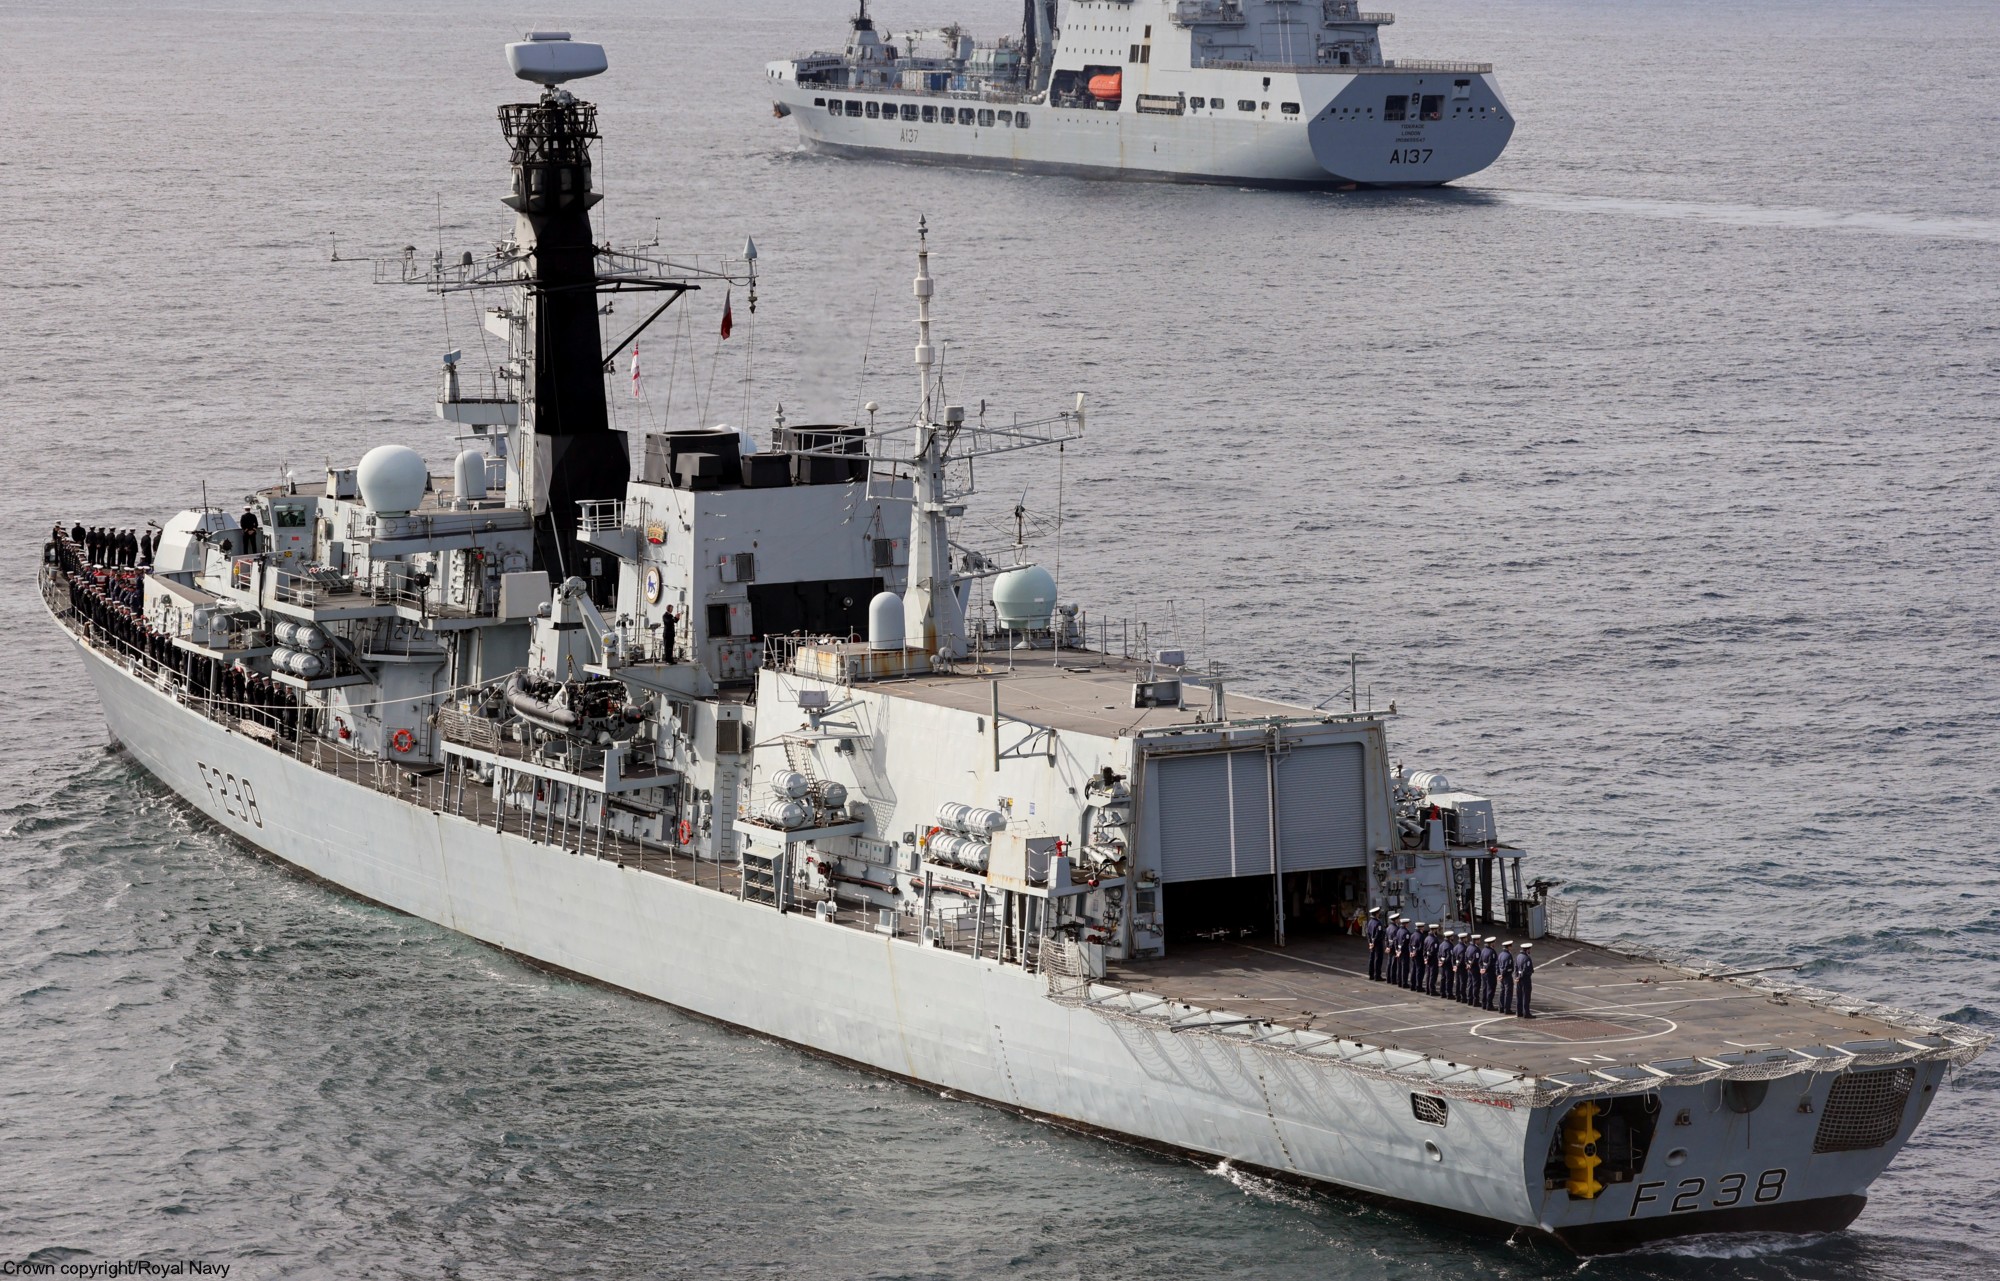 f-238 hms northumberland type 23 duke class guided missile frigate ffg royal navy 55